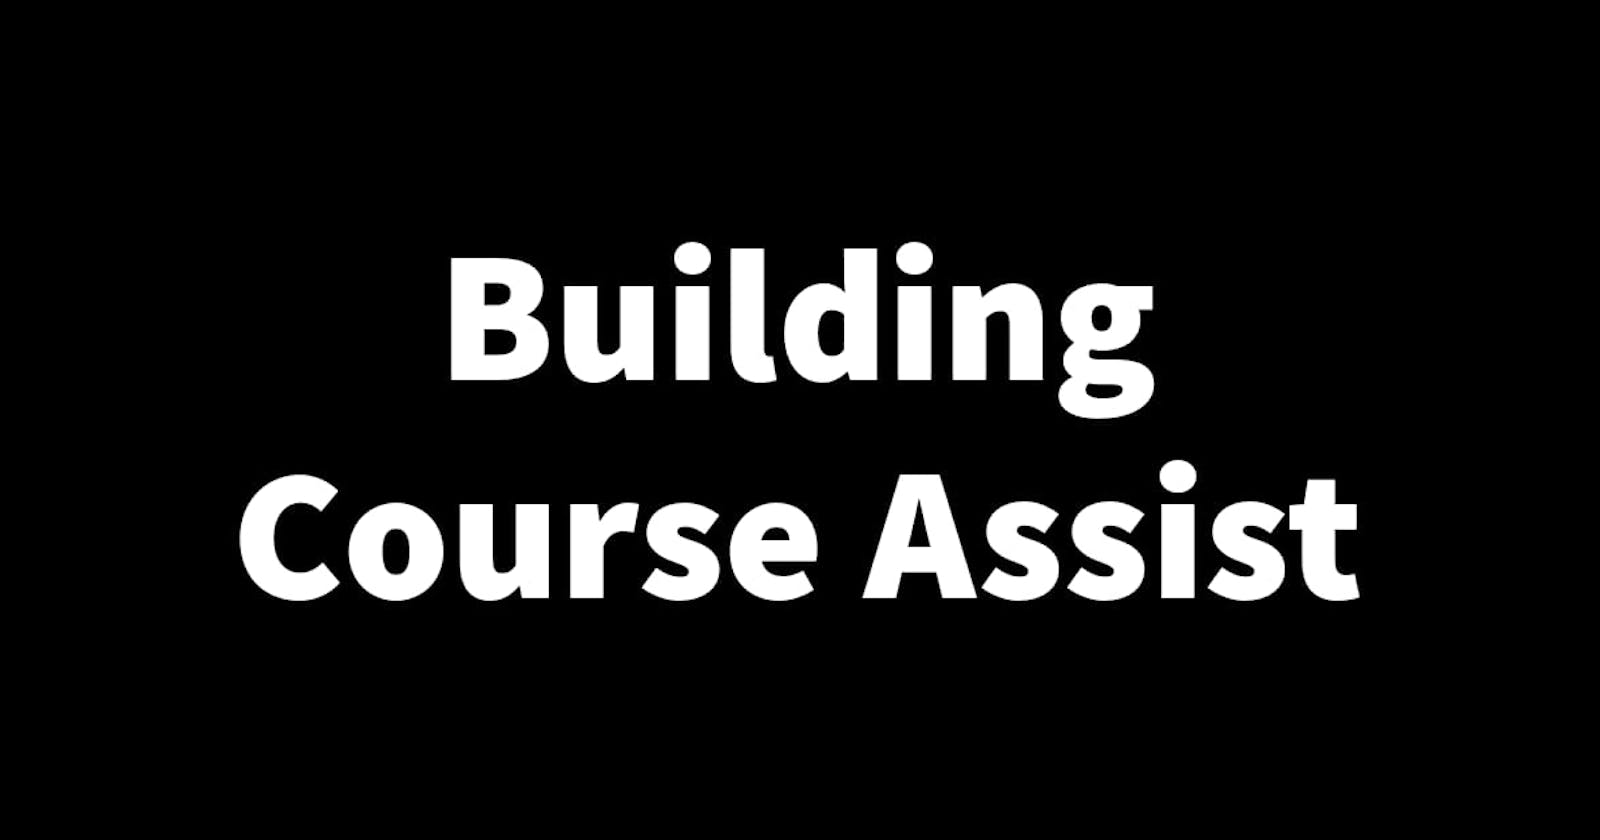 Building Course Assist Part 17: Customizing the Couse Assist admin interface